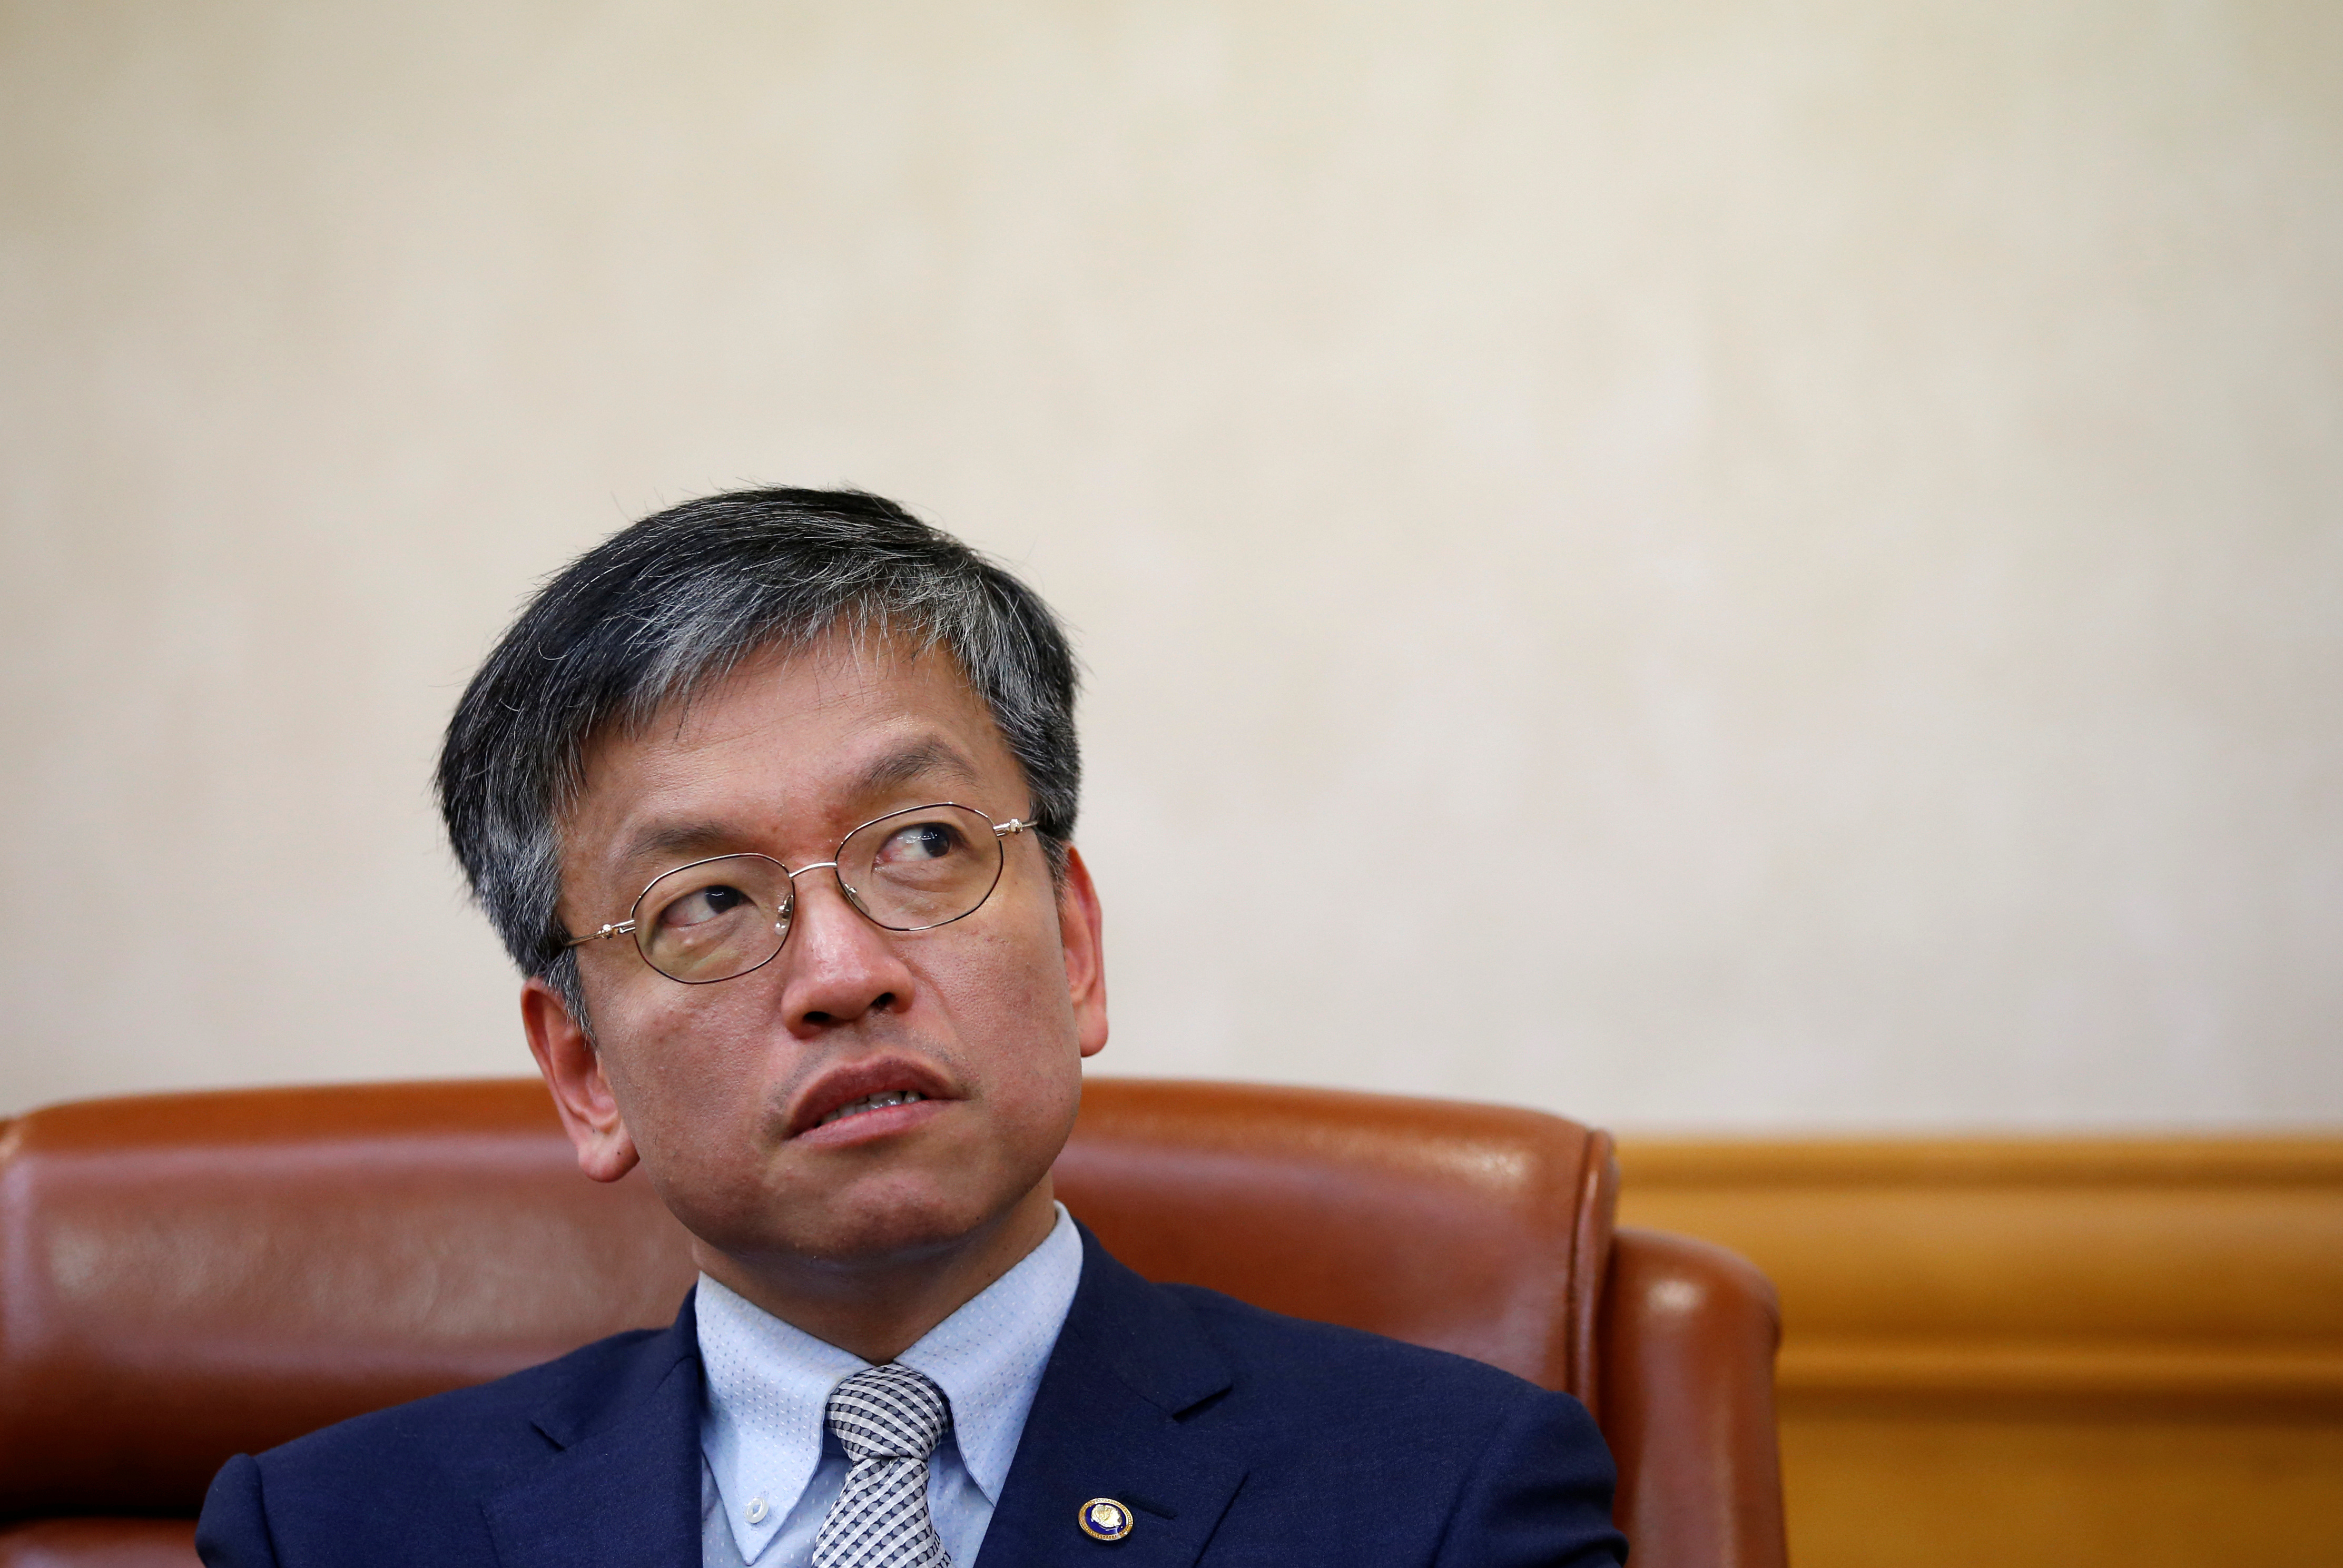 South Korea Vice Finance Minister Choi Sang-mok speaks during an interview with Reuters in Seoul